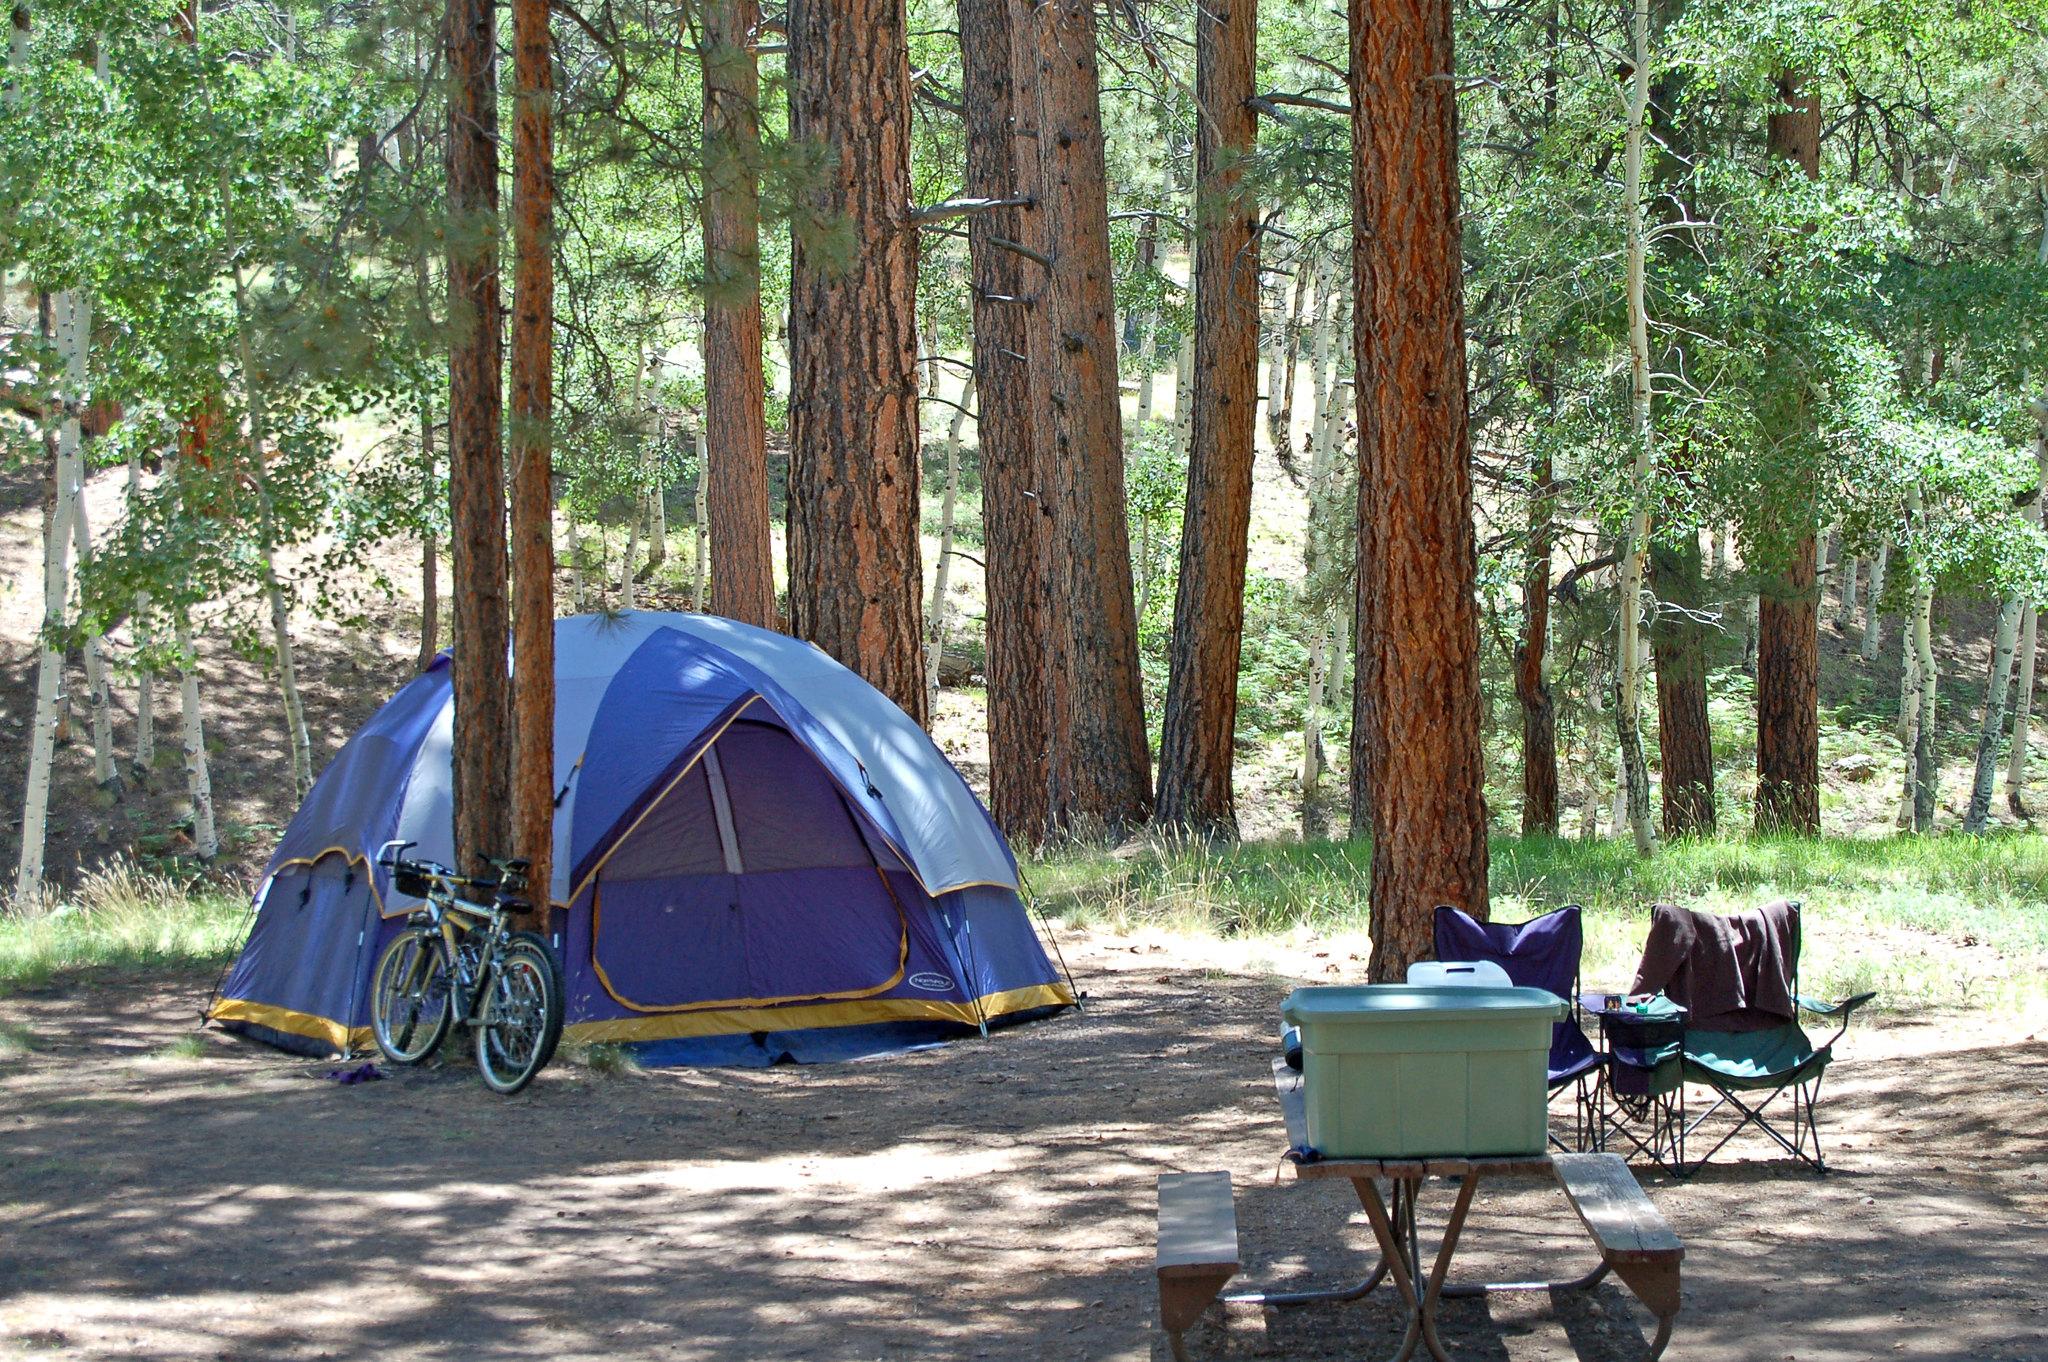 Two bicycles parked next to a large blue tent under pine trees. Picnic table in the foreground.